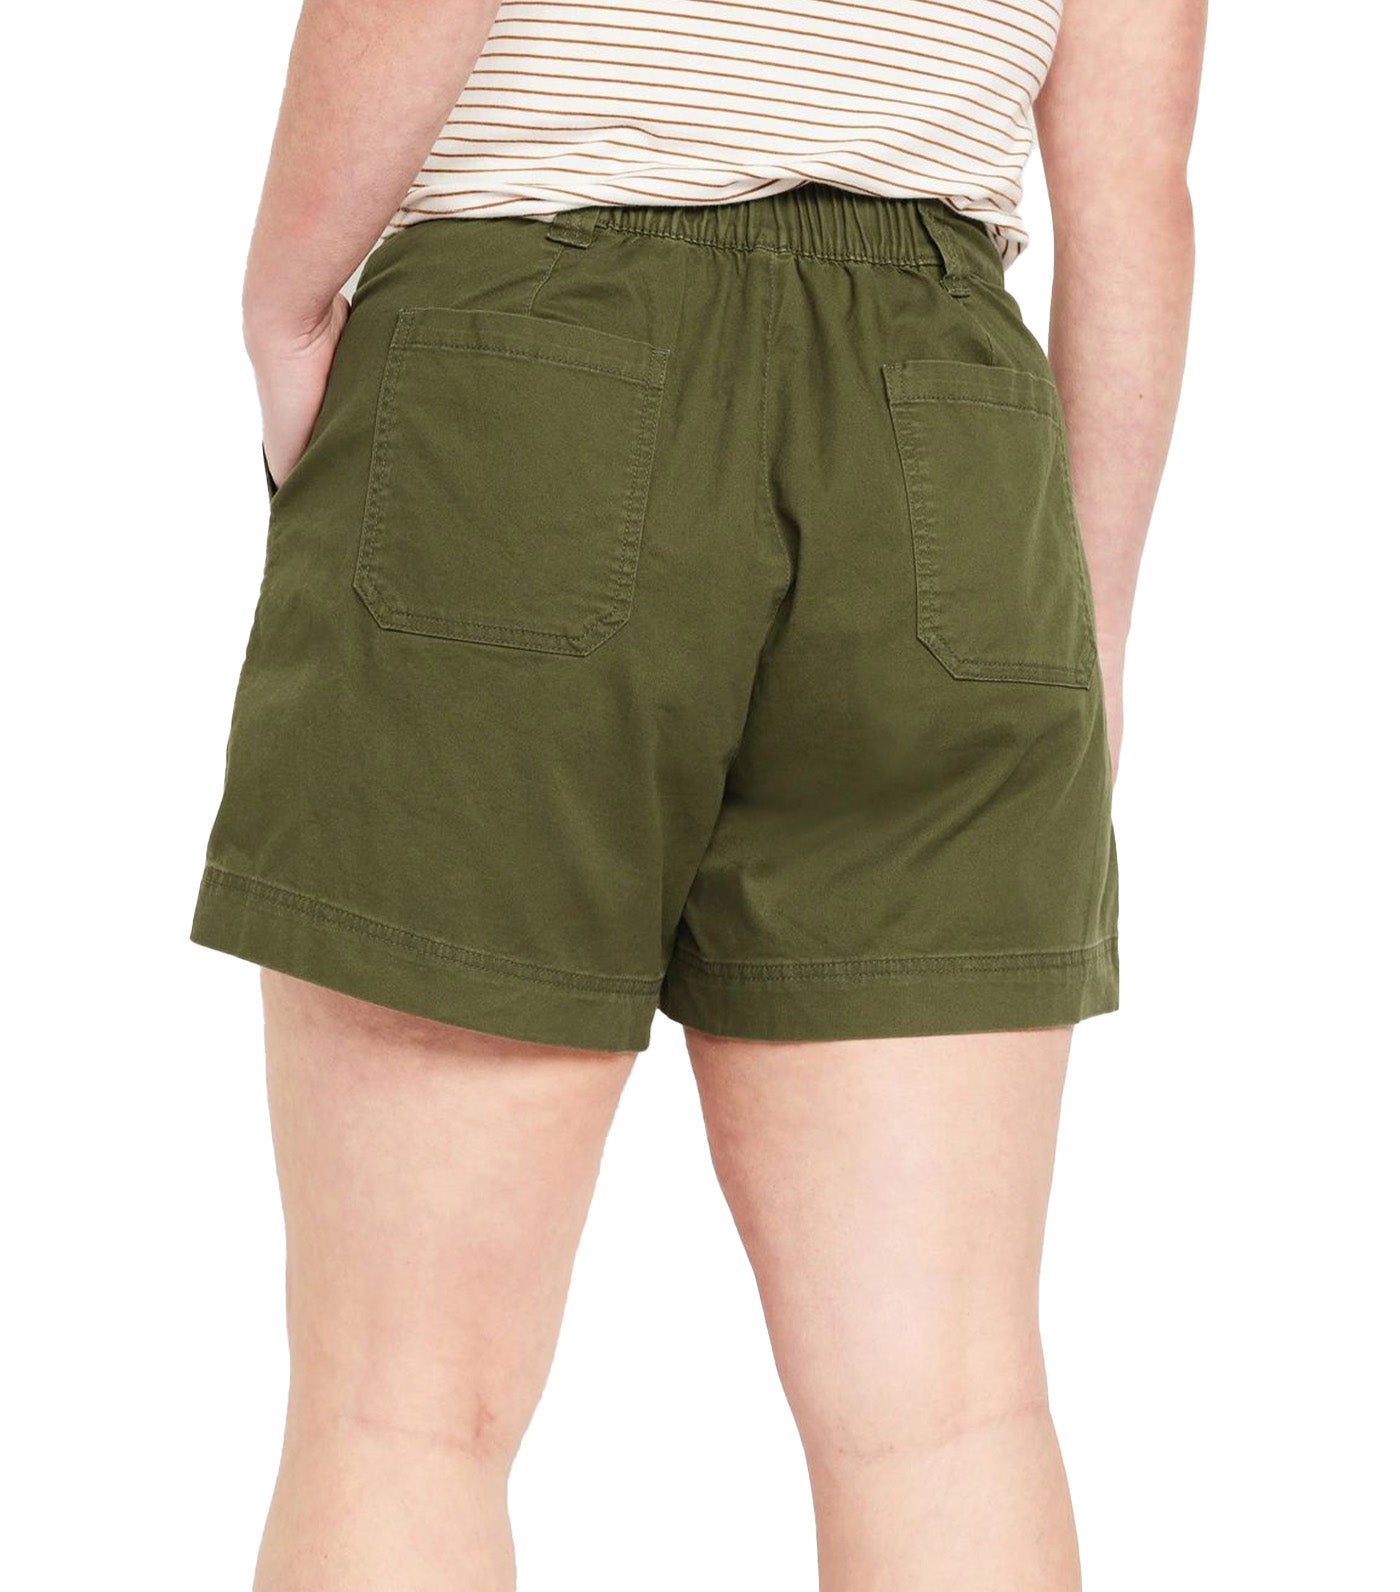 High-Waisted OGC Utility Chino Shorts for Women 5-Inch Inseam Conifer